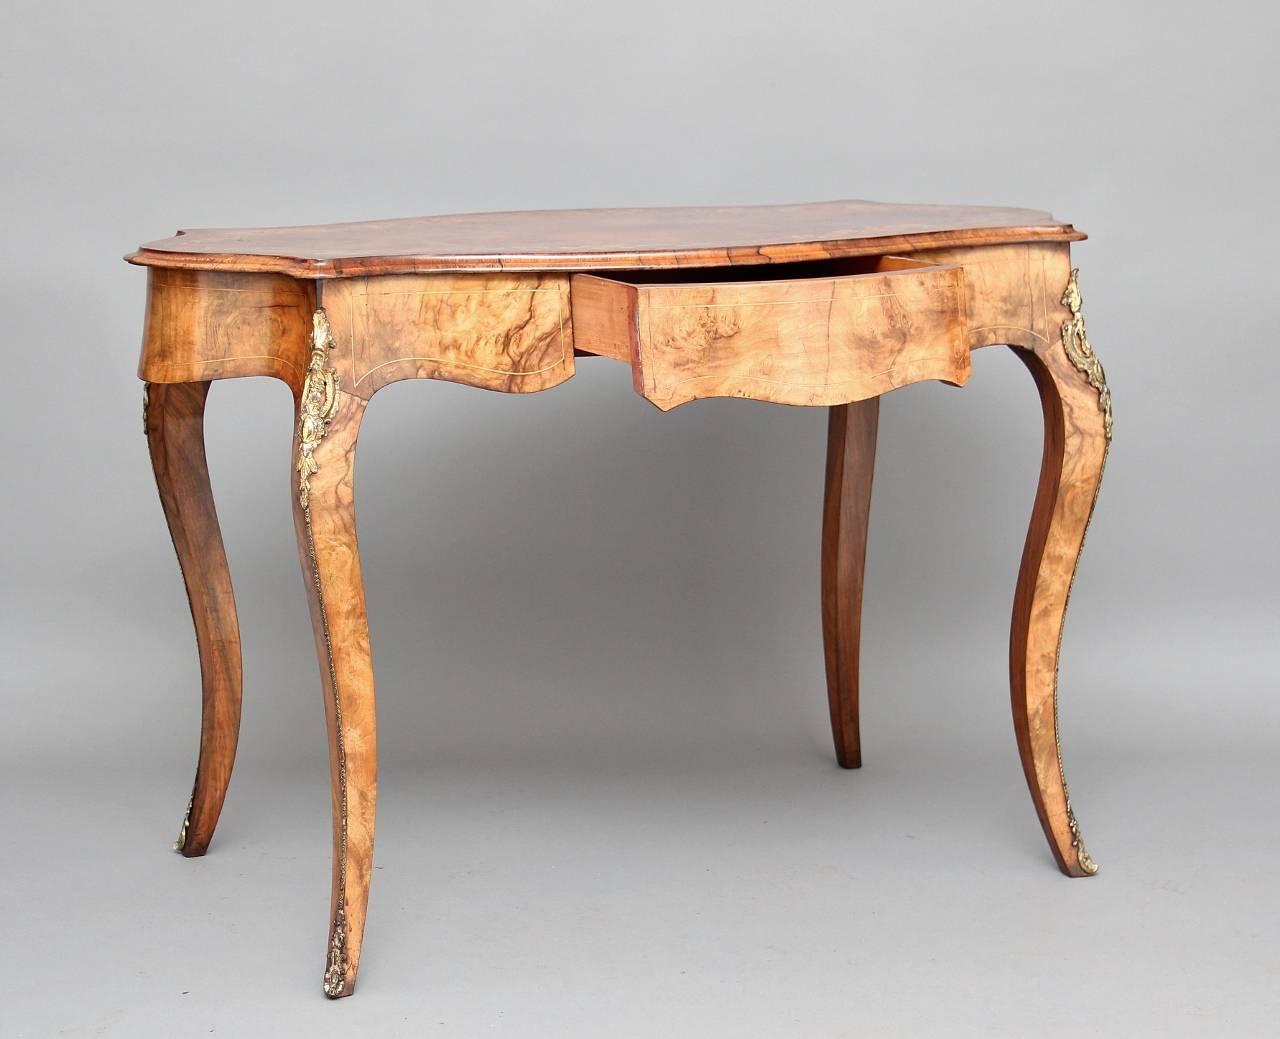 19th century inlaid walnut centre table, the top inlaid with floral marquetry with a thumb moulded edge, below with a nice shaped frieze with a single drawer at the front, standing on cabriole legs decorated with lovely quality brass mounts at the